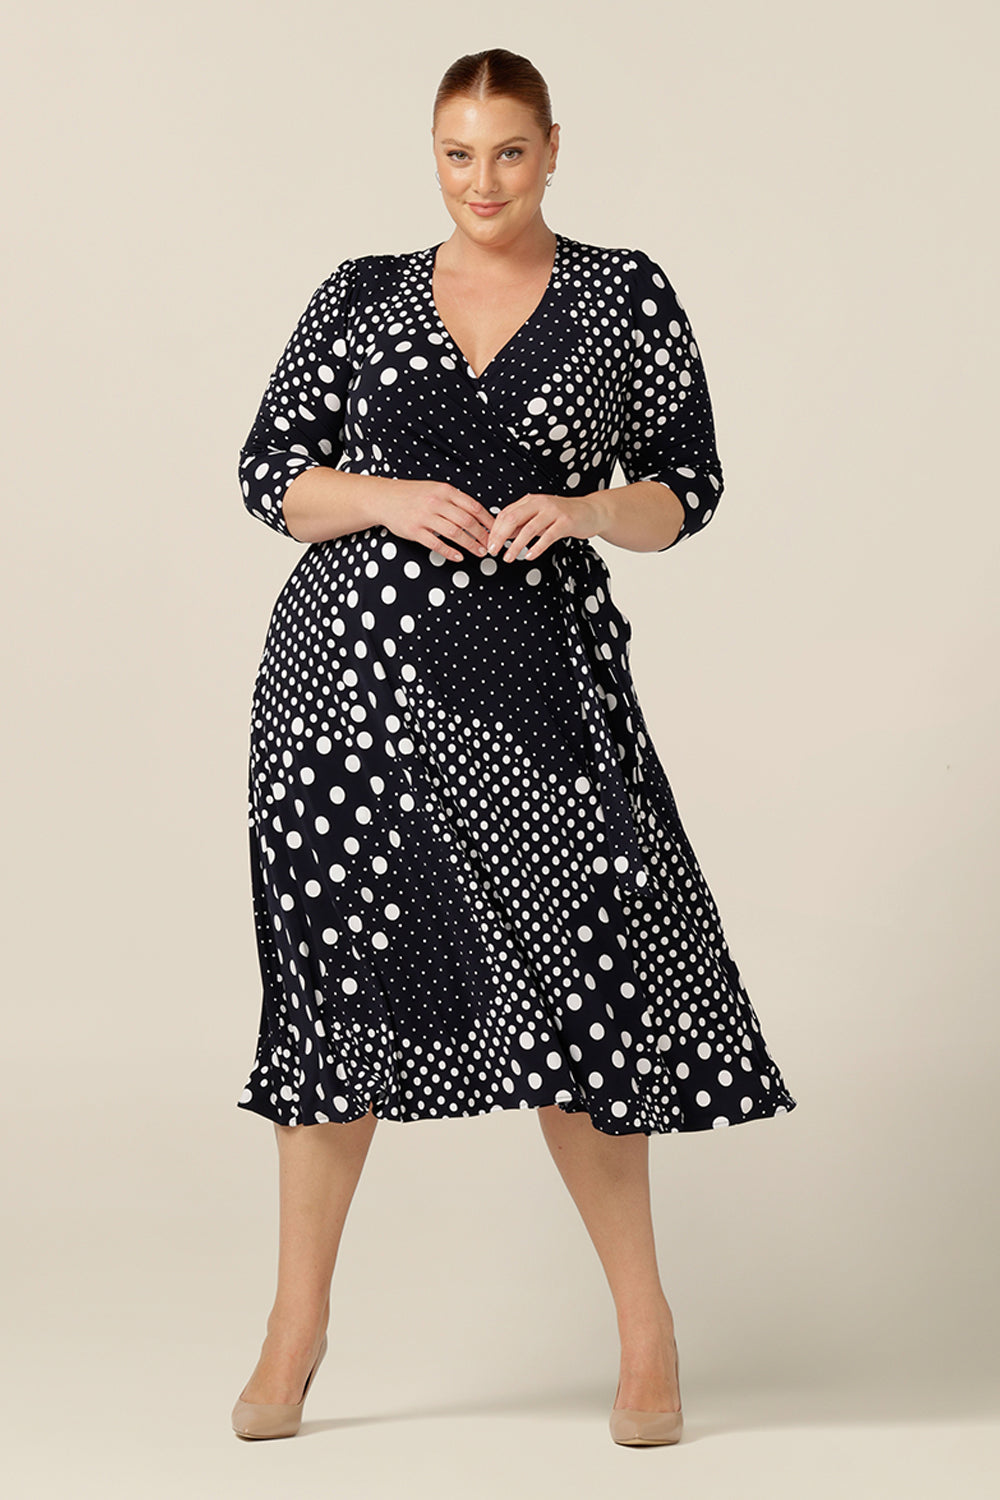 Made in Australia, this jersey wrap dress with navy and white polka dot print, is a great workwear and occasion dress. Featuring 3/4 sleeves and a full, below-the-knee length skirt, this wrap dress is available to shop online in sizes 8 to plus sizes 18-24.